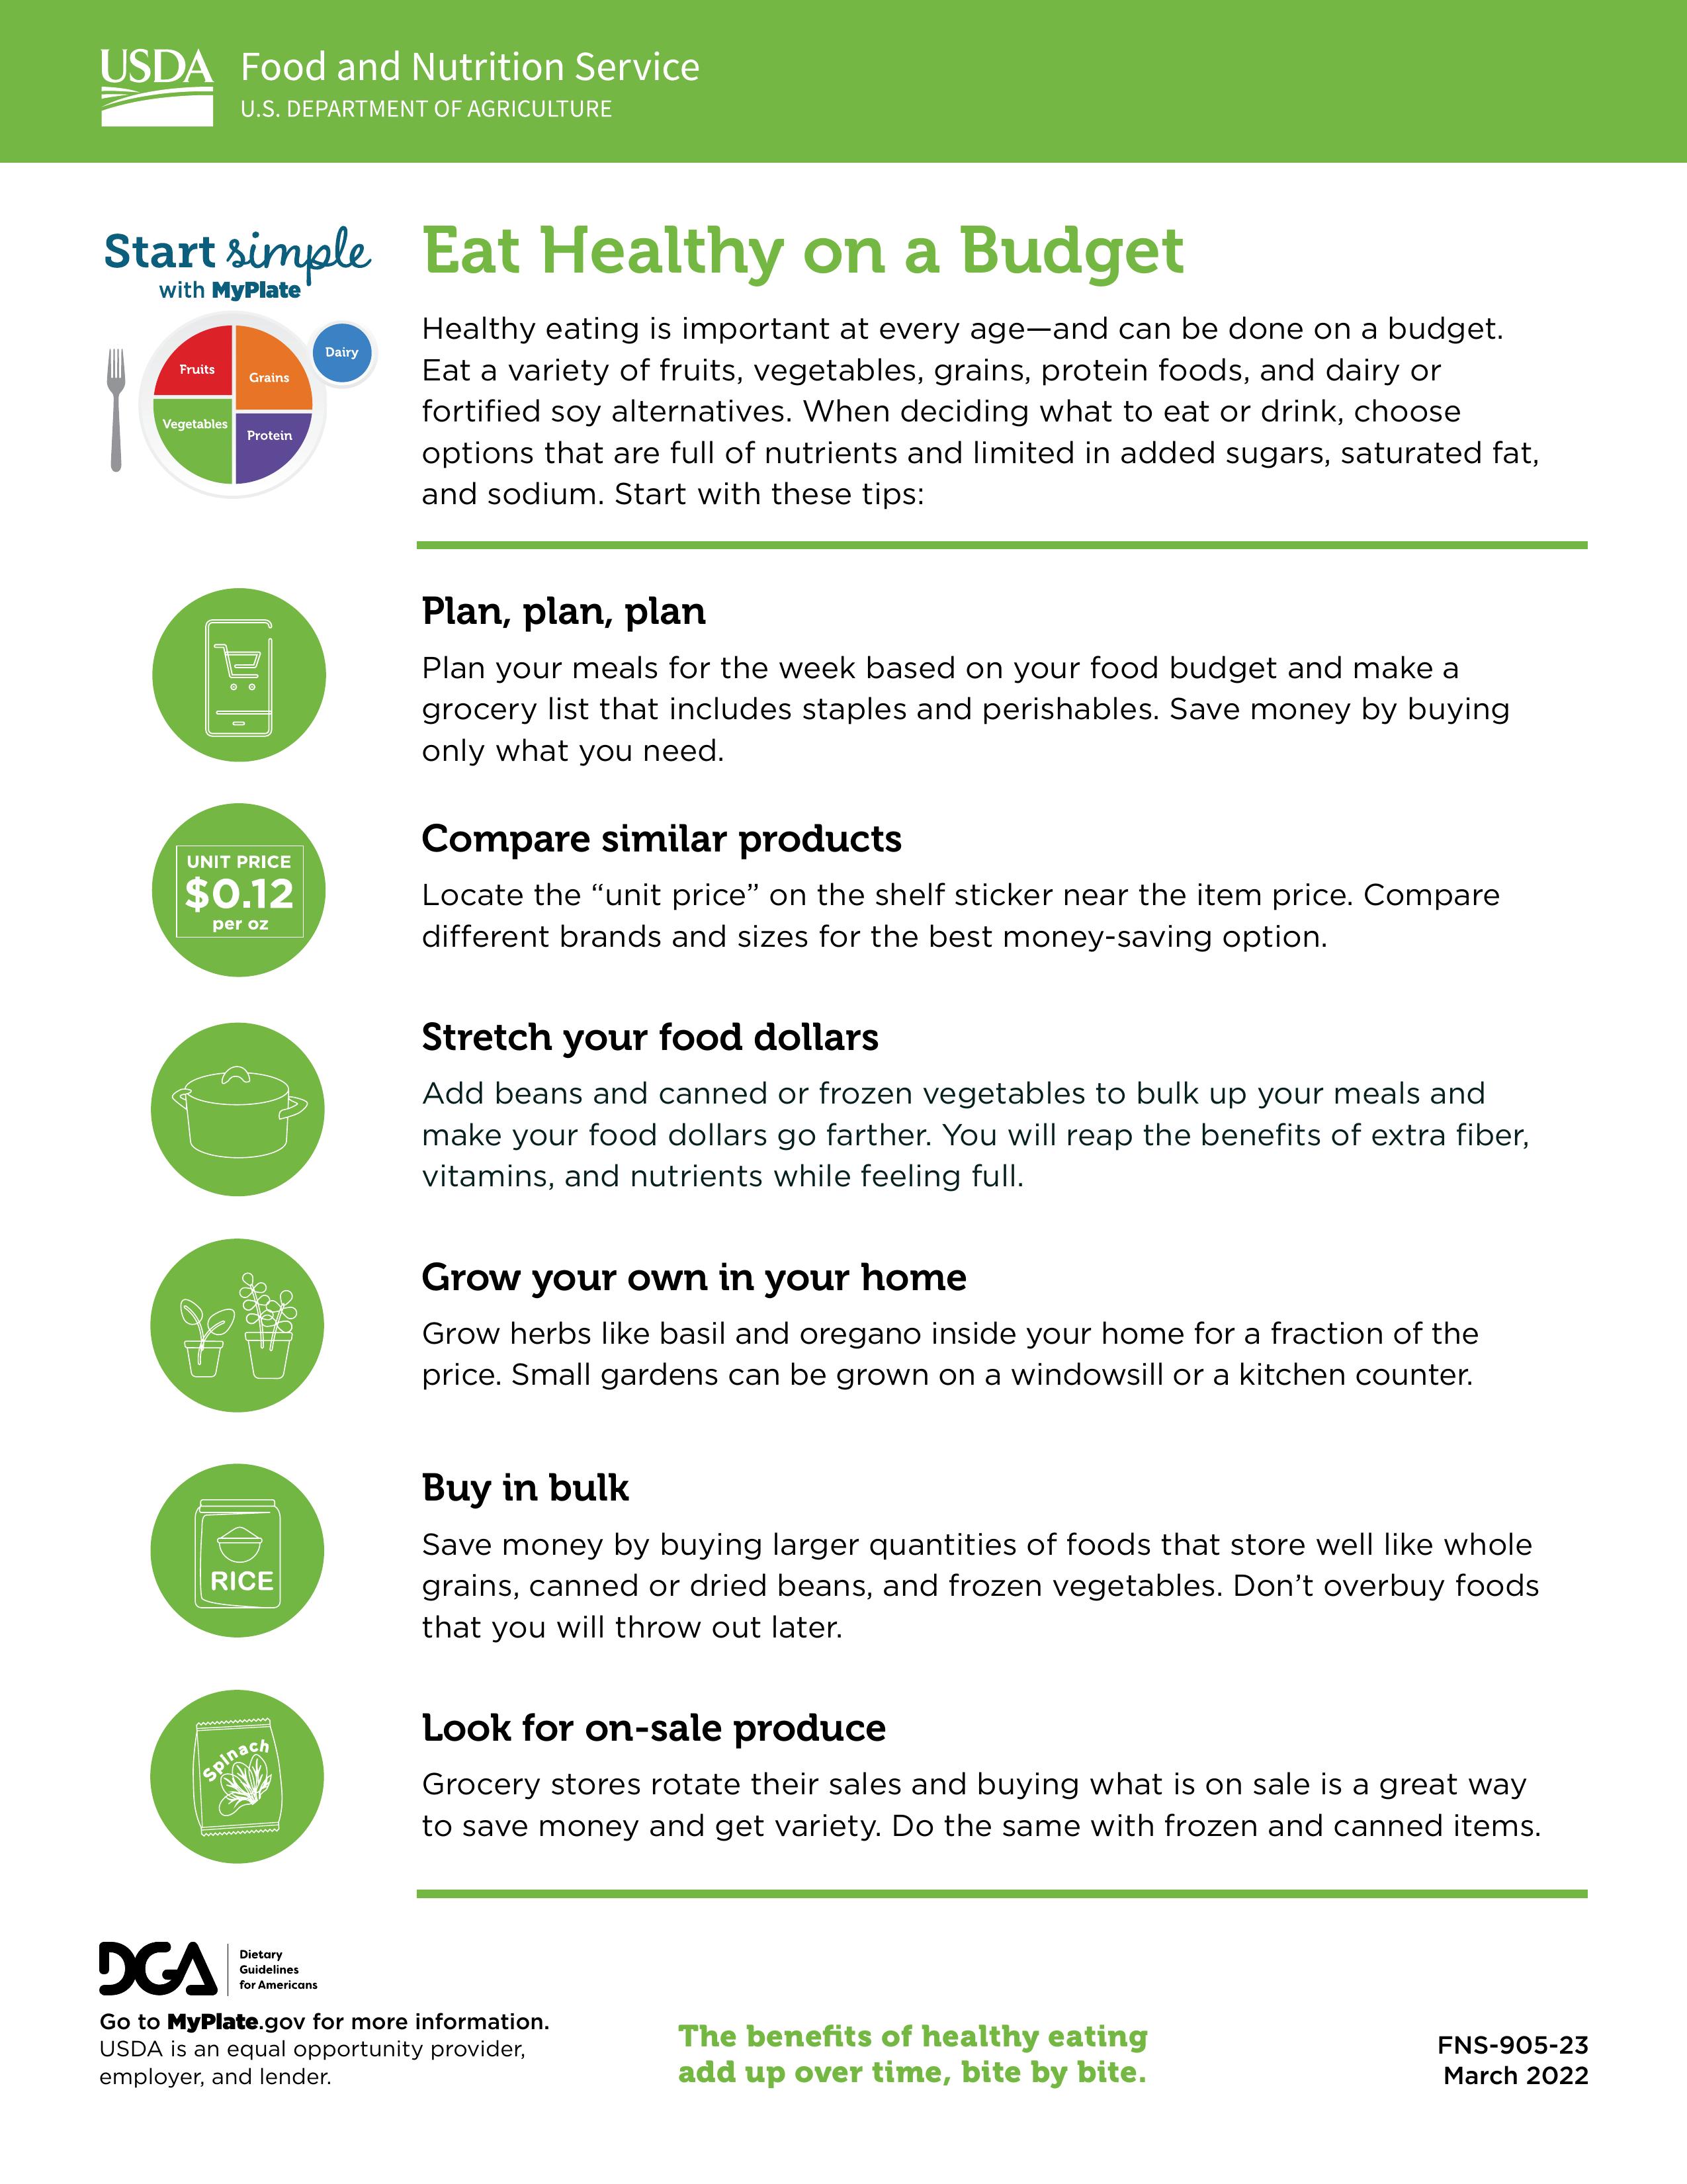 USDA Graphic with tips on cost effective healthy eating